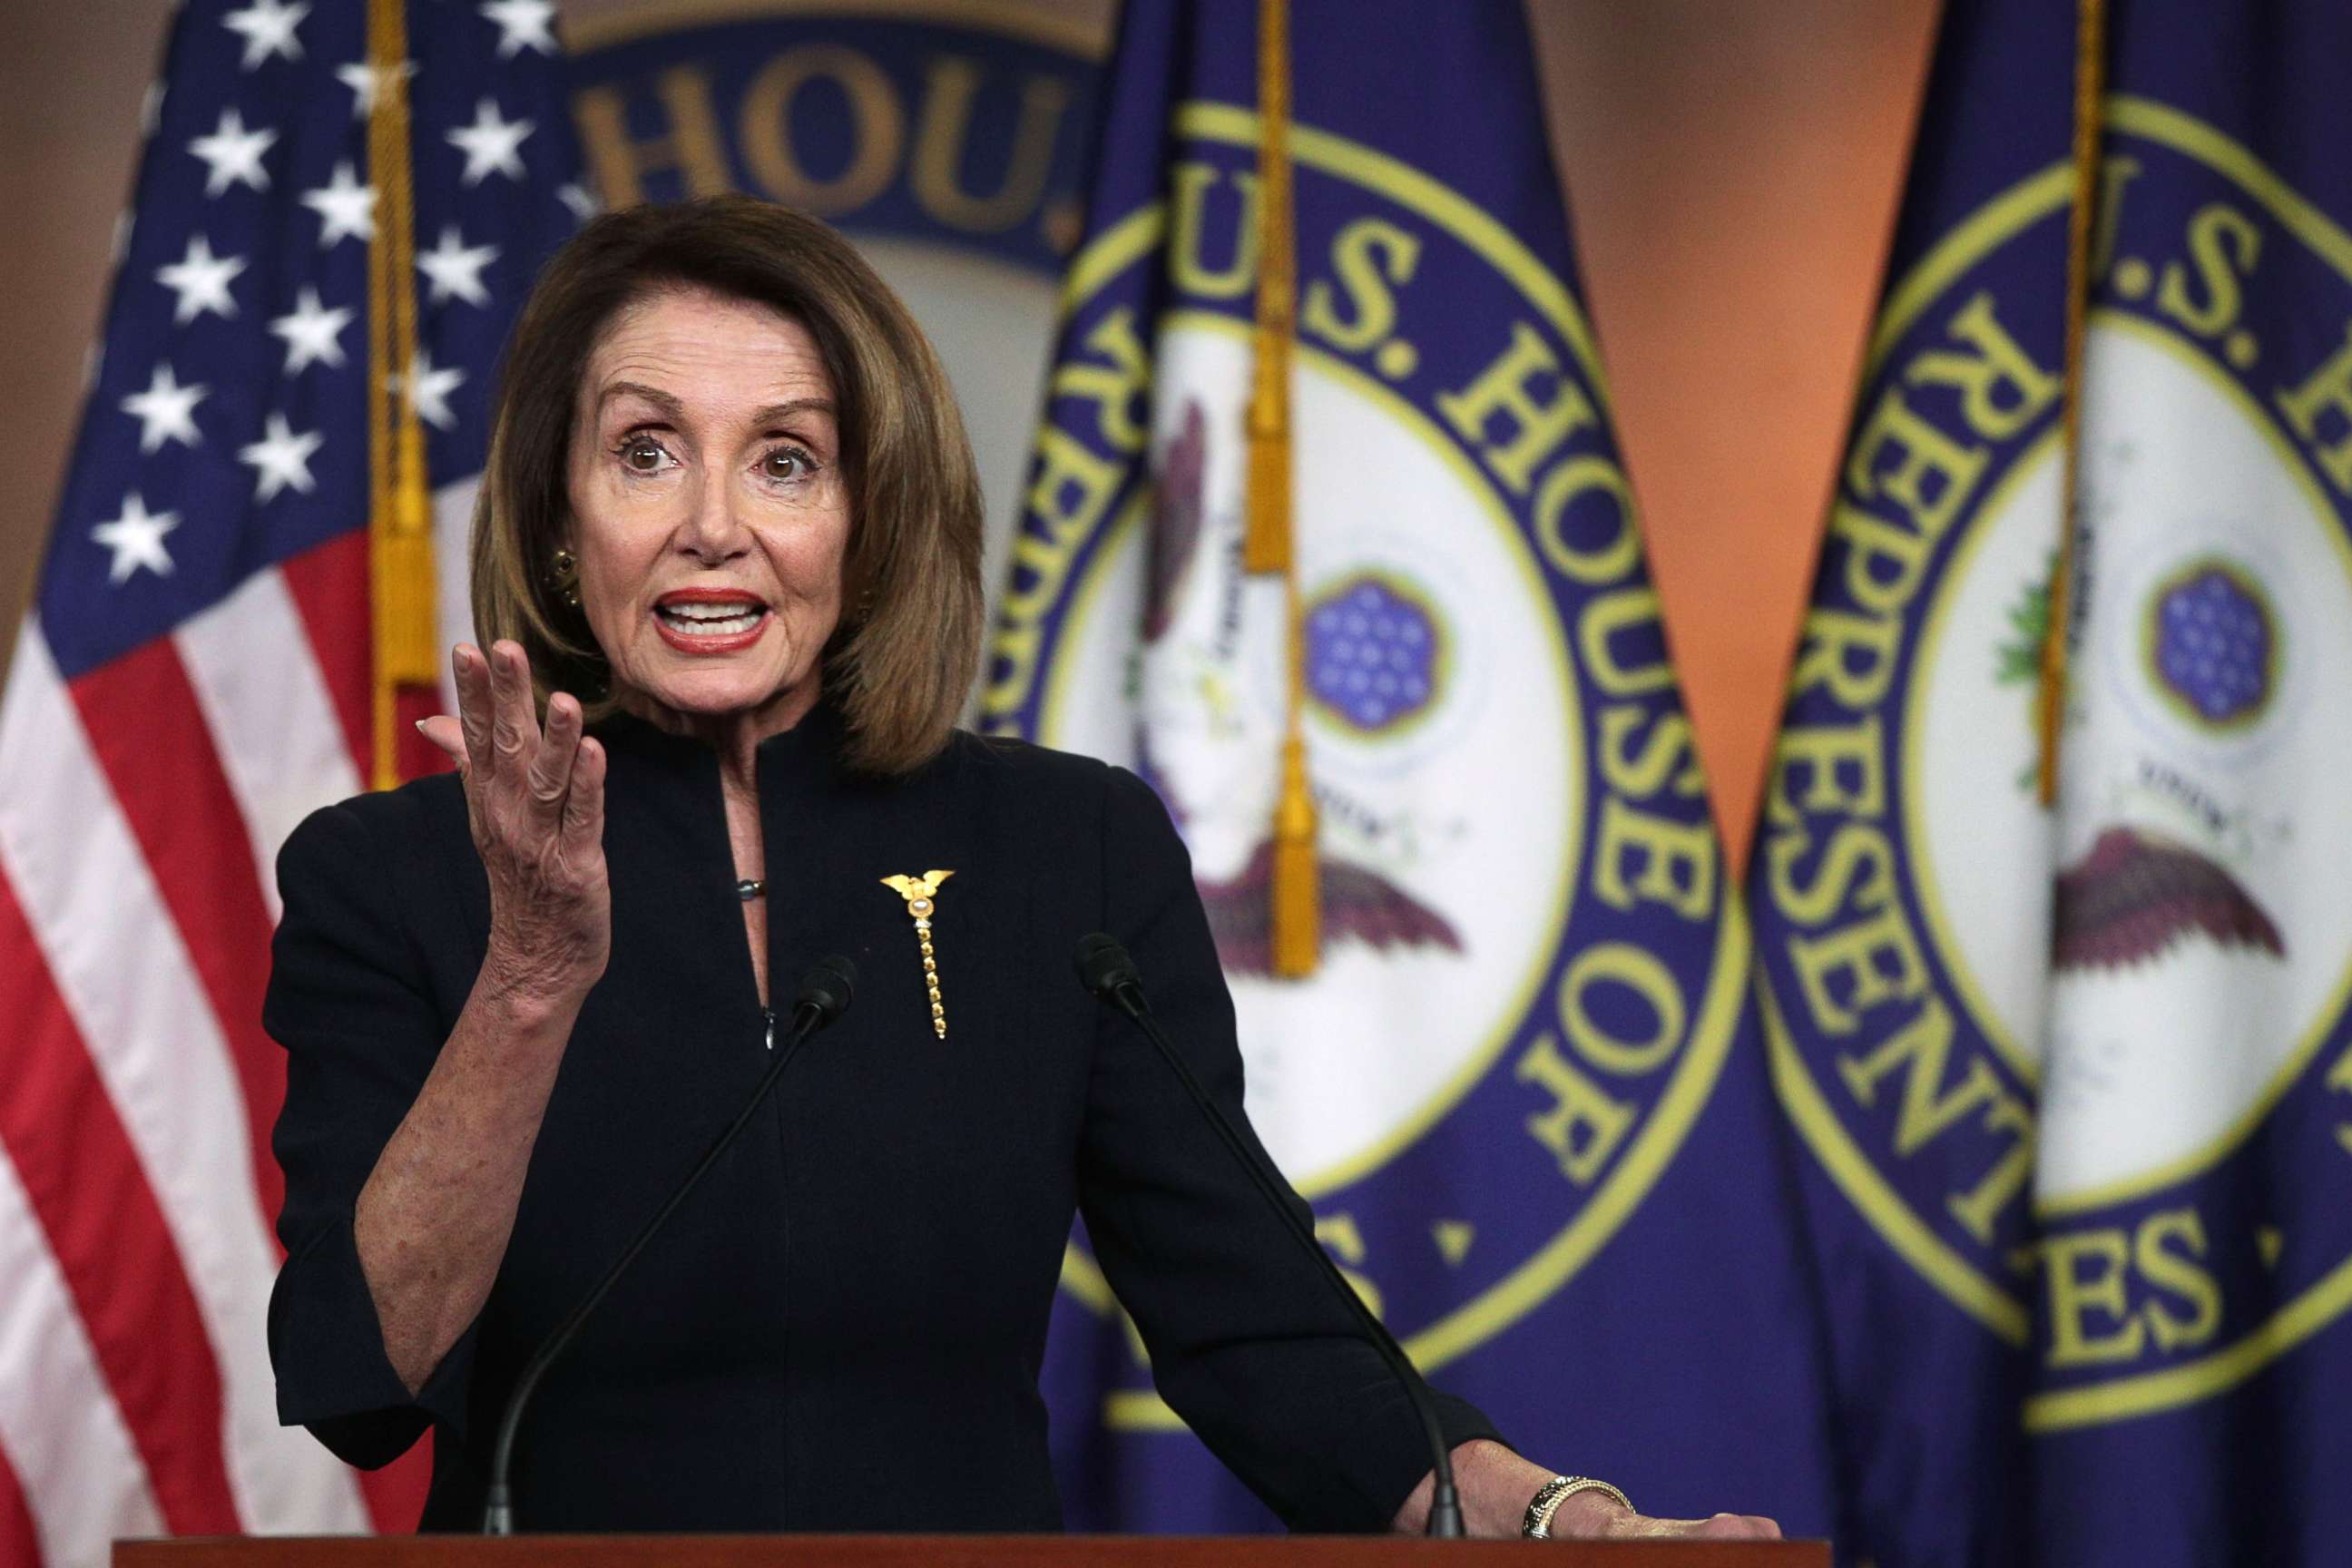 PHOTO: Speaker of the House Rep. Nancy Pelosi speaks during a weekly news conference at the U.S. Capitol, Feb. 14, 2019, in Washington, DC.